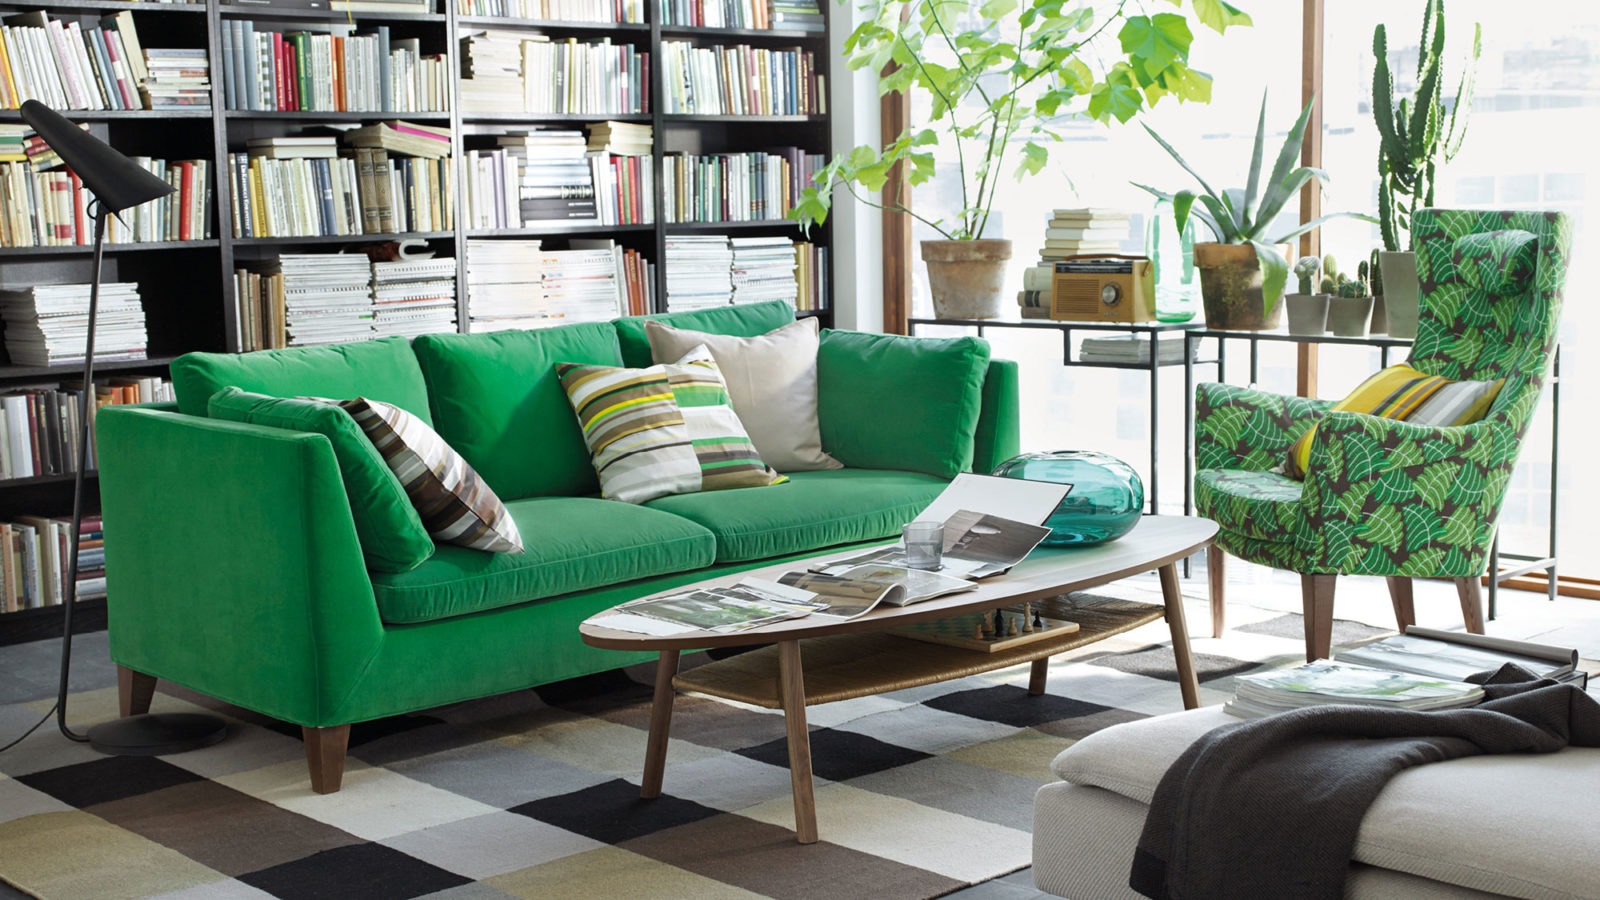 A room with a green sofa and a green-patterned armchair at an oval coffee table. Green plants in a large sunlit window.